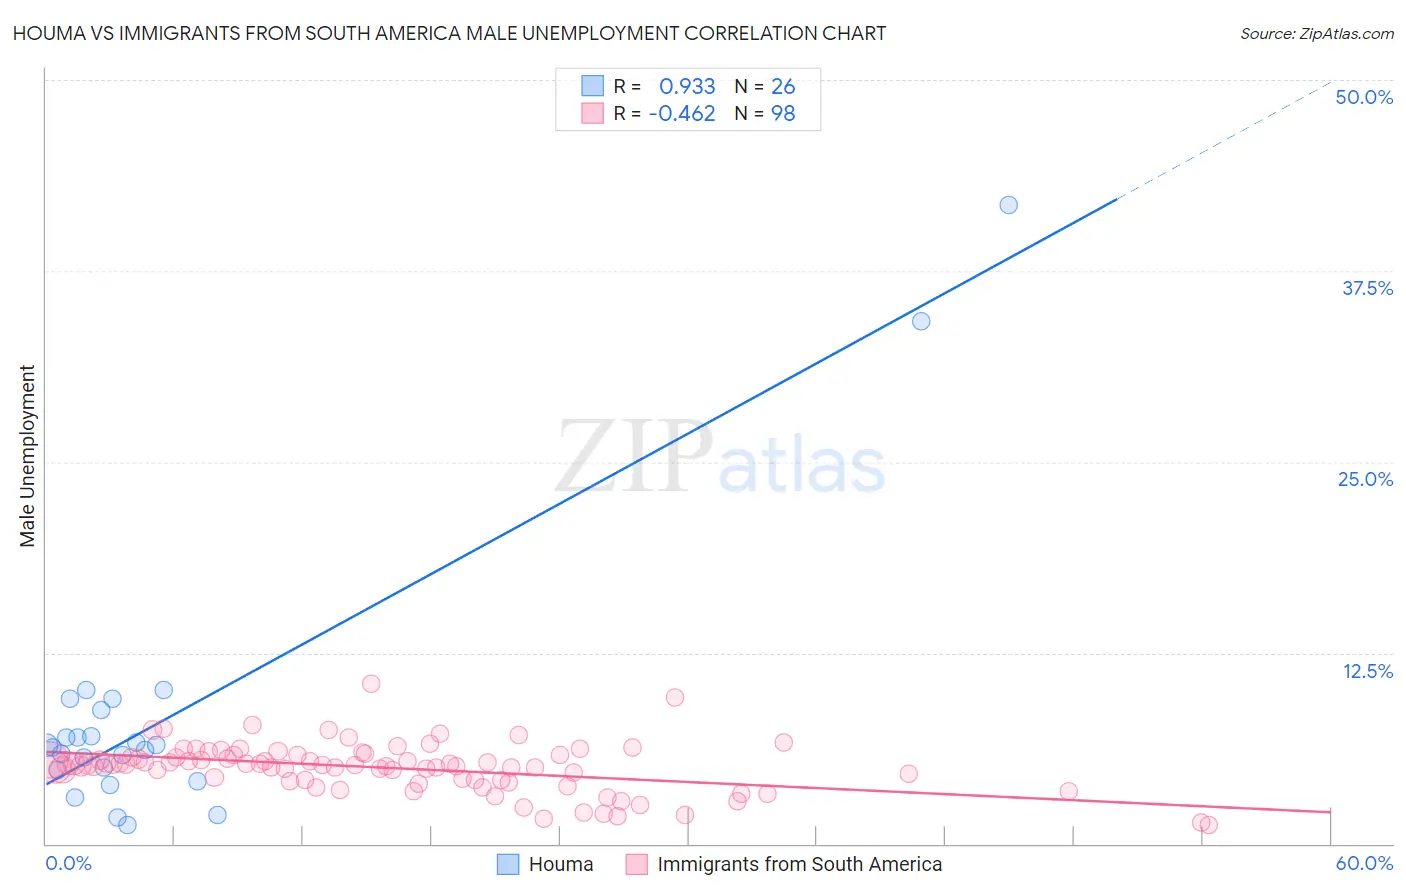 Houma vs Immigrants from South America Male Unemployment